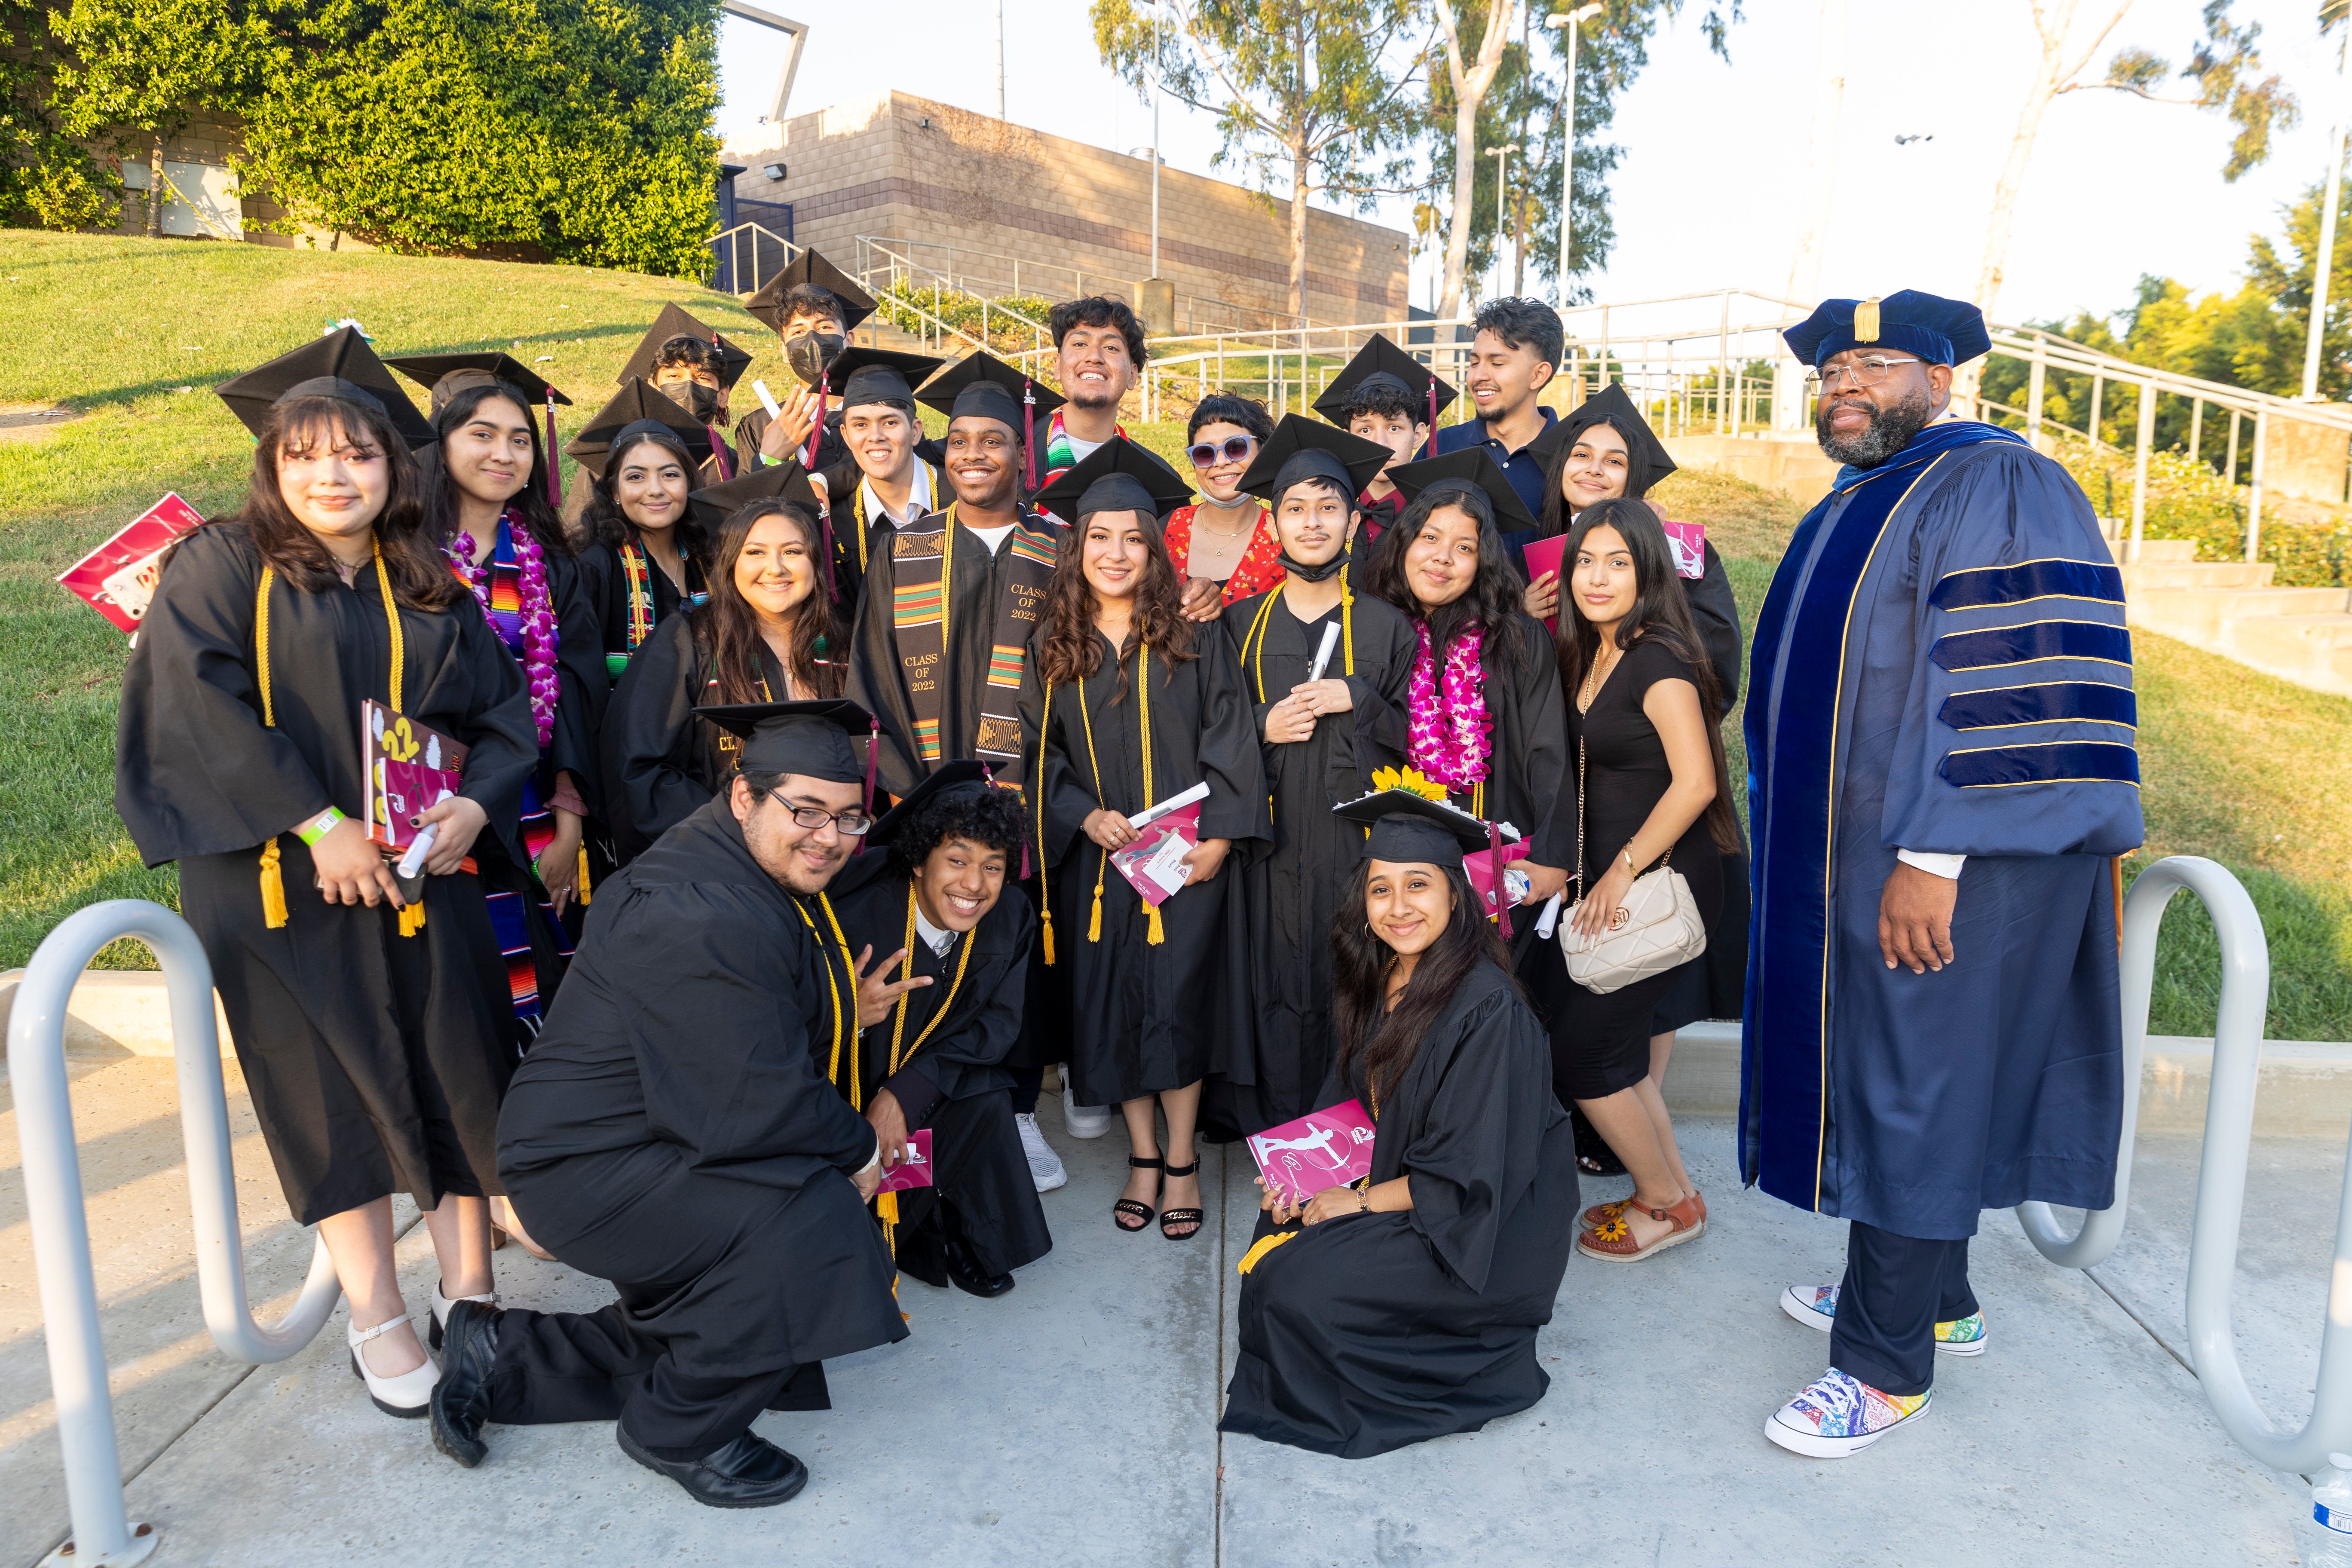 Keith Curry, at right, wearing his cap and gown and Chuck Taylor sneakers, with a group of graduating students during Compton College's 2022 commencement ceremony.